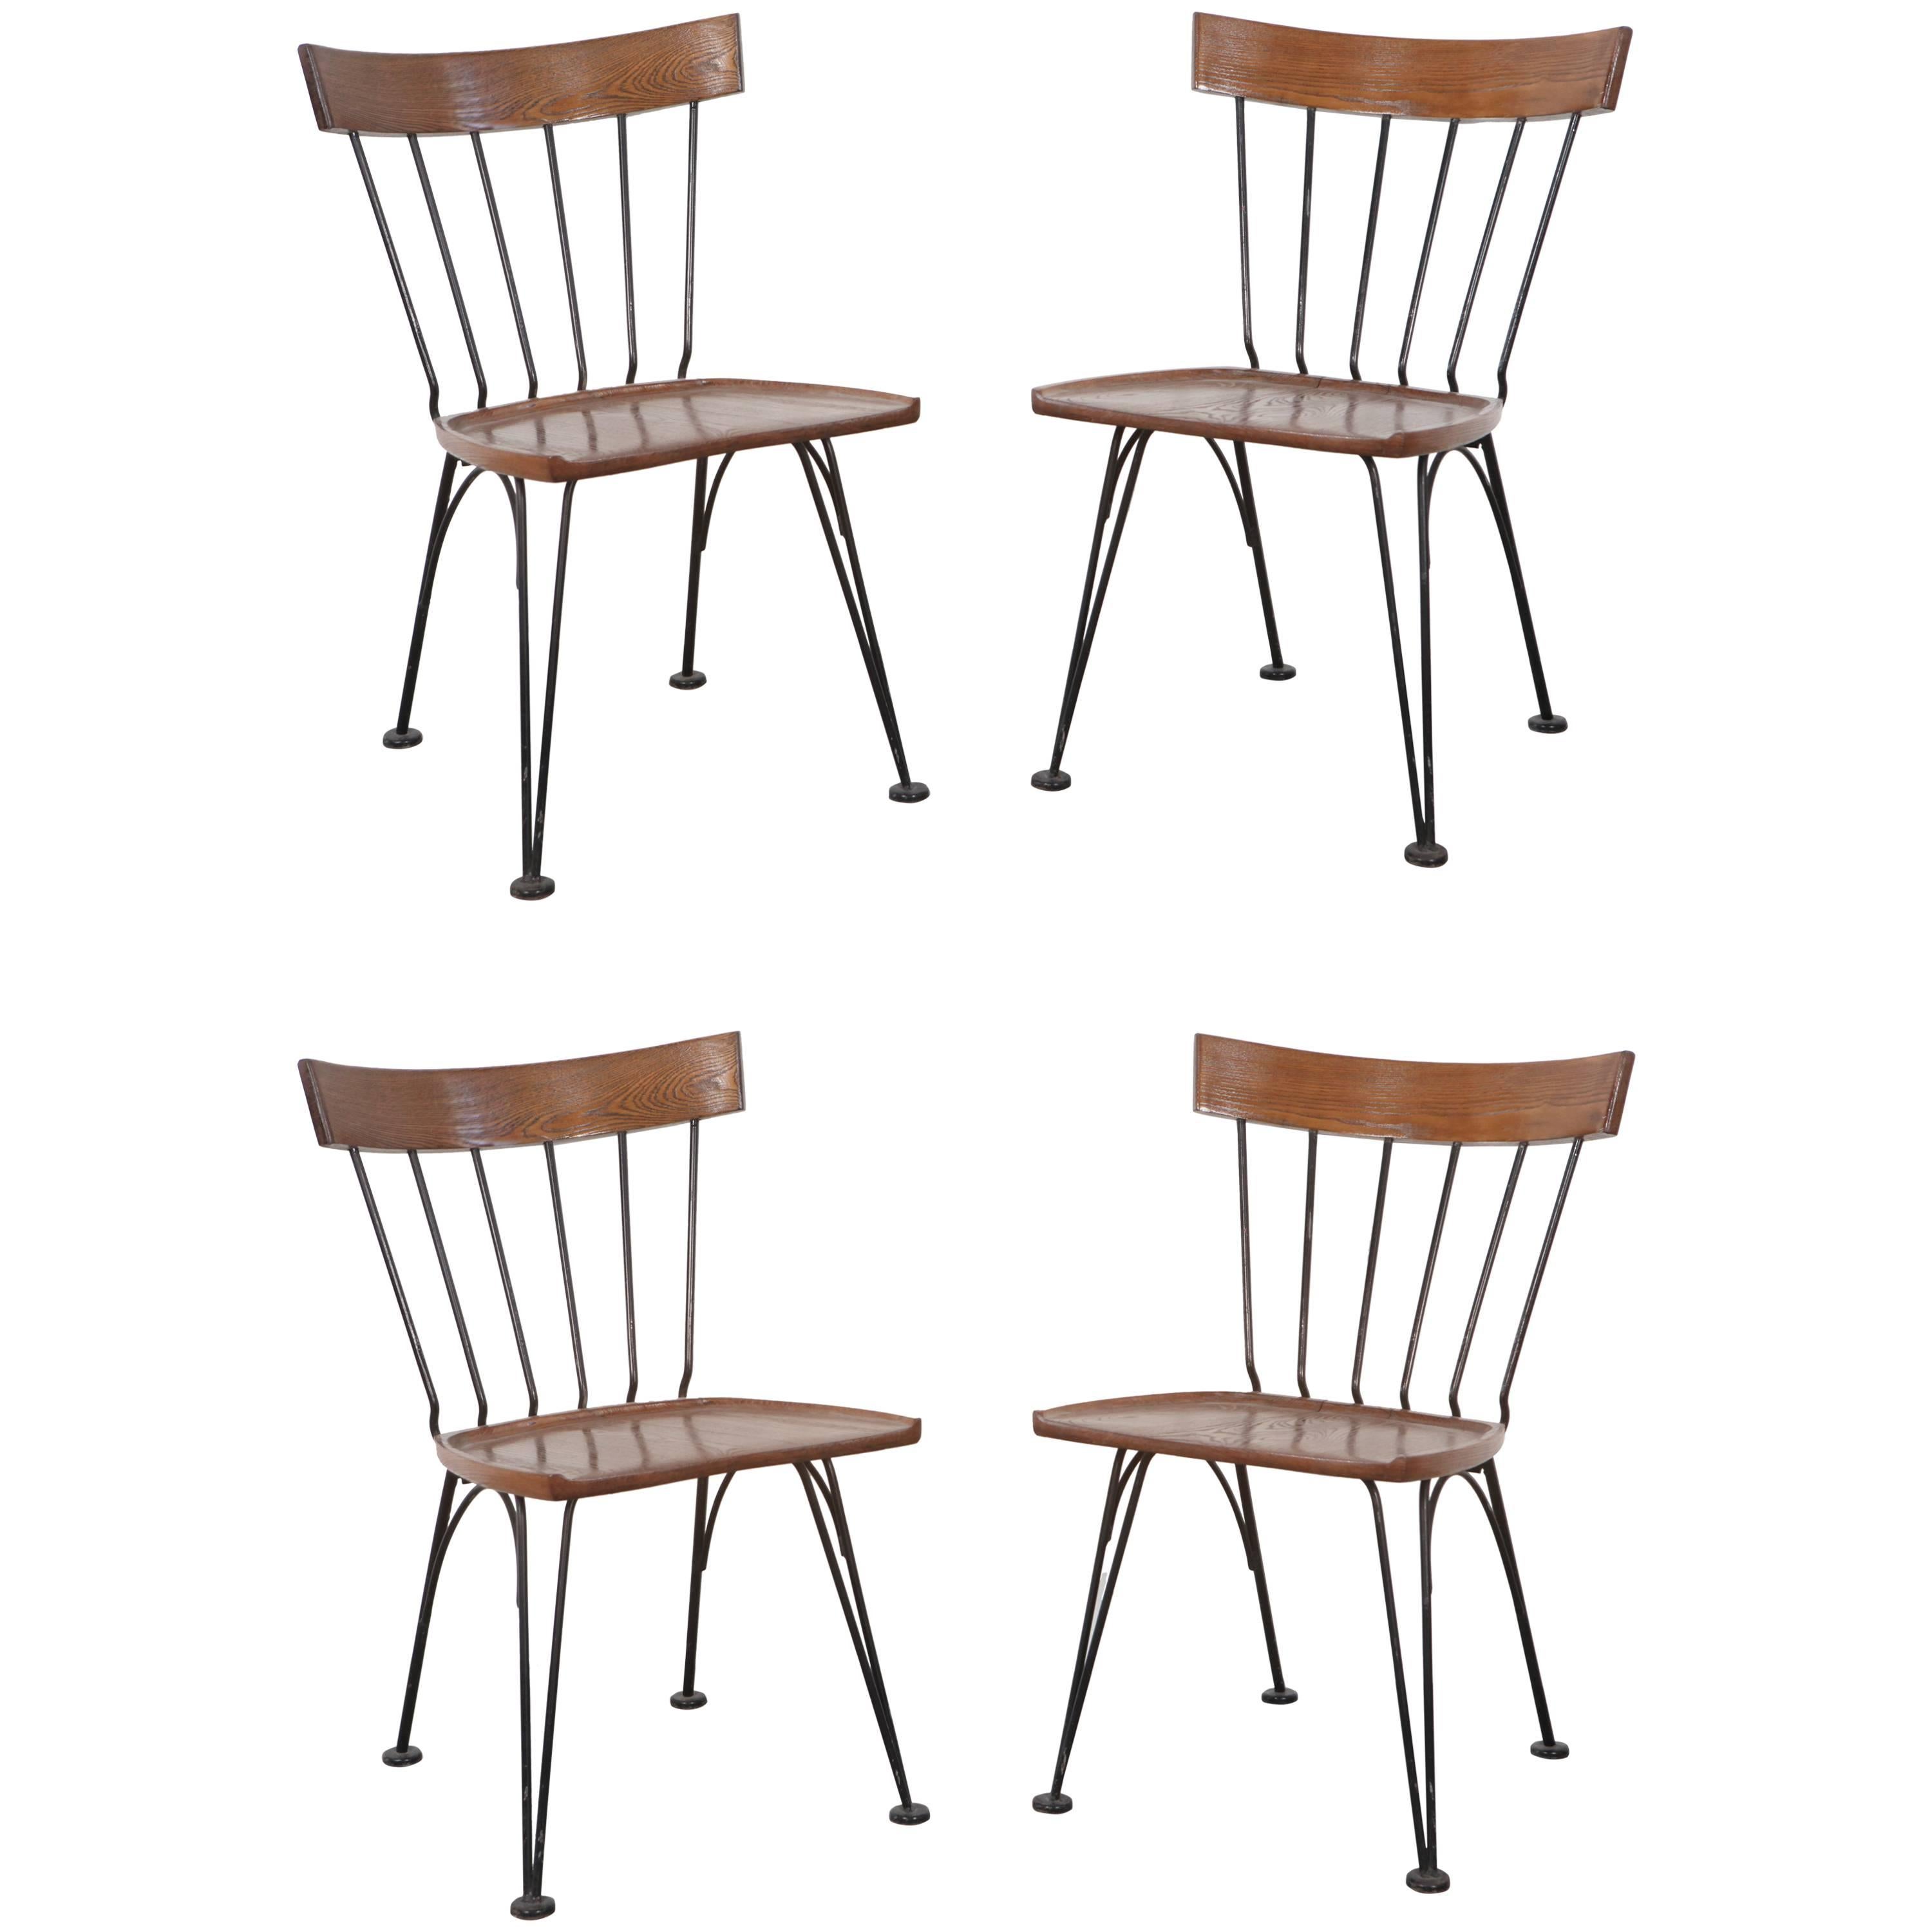 Set of Four Shovel Chairs by Lee Woodard